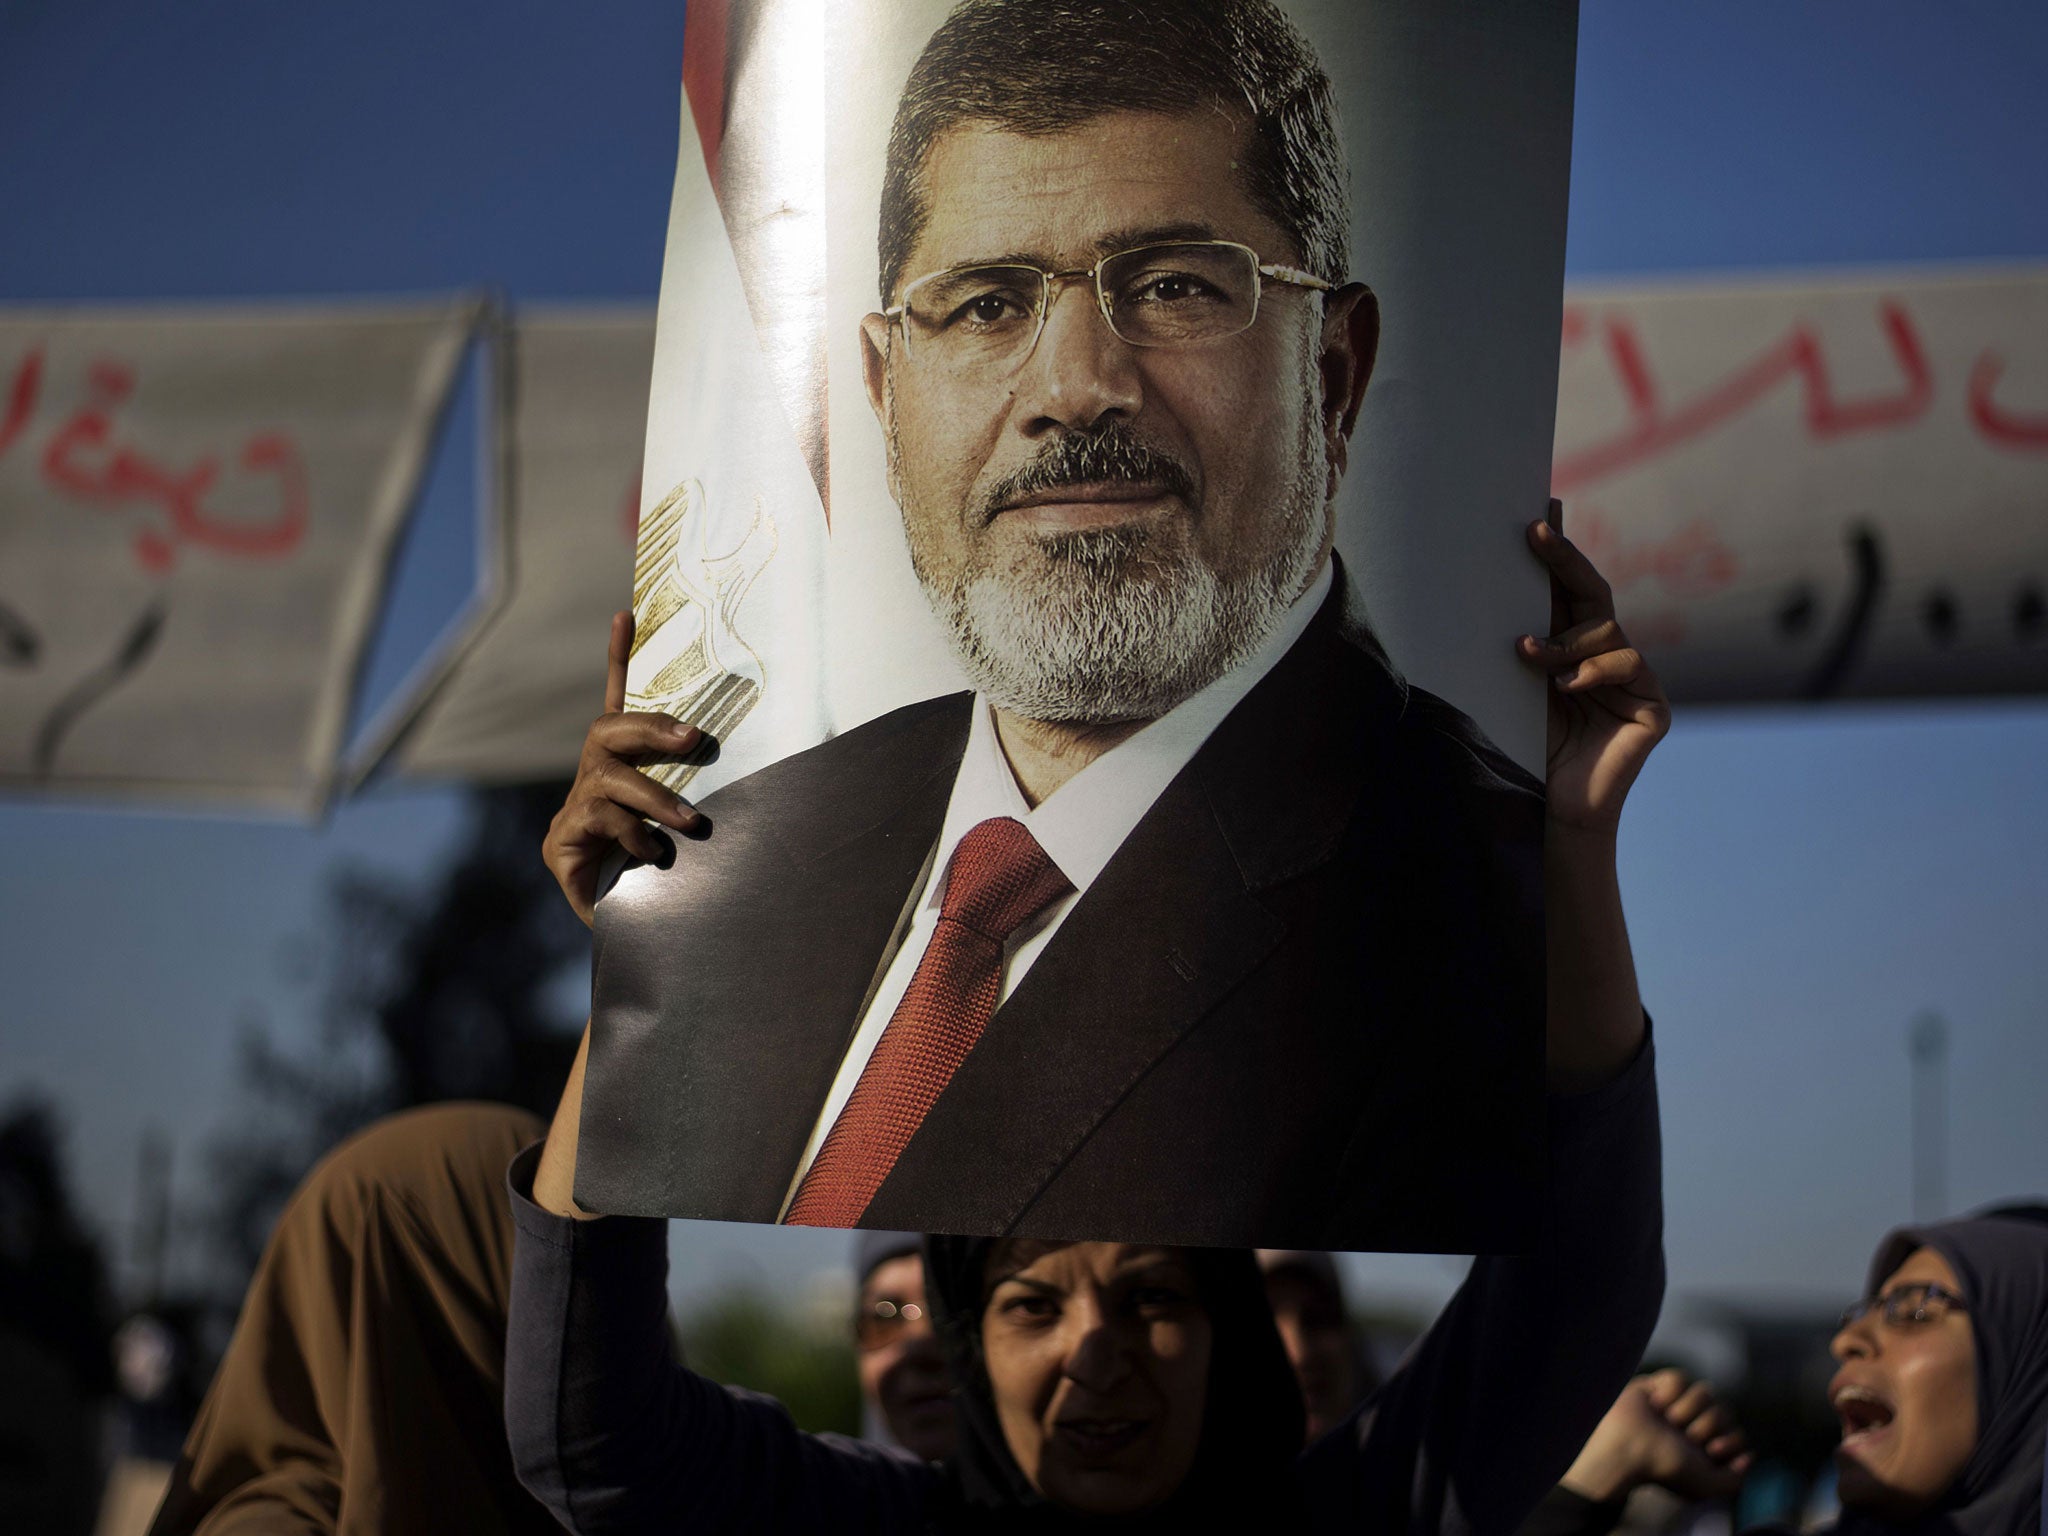 Morsi supporters at a march in Cairo’s Galaa Square